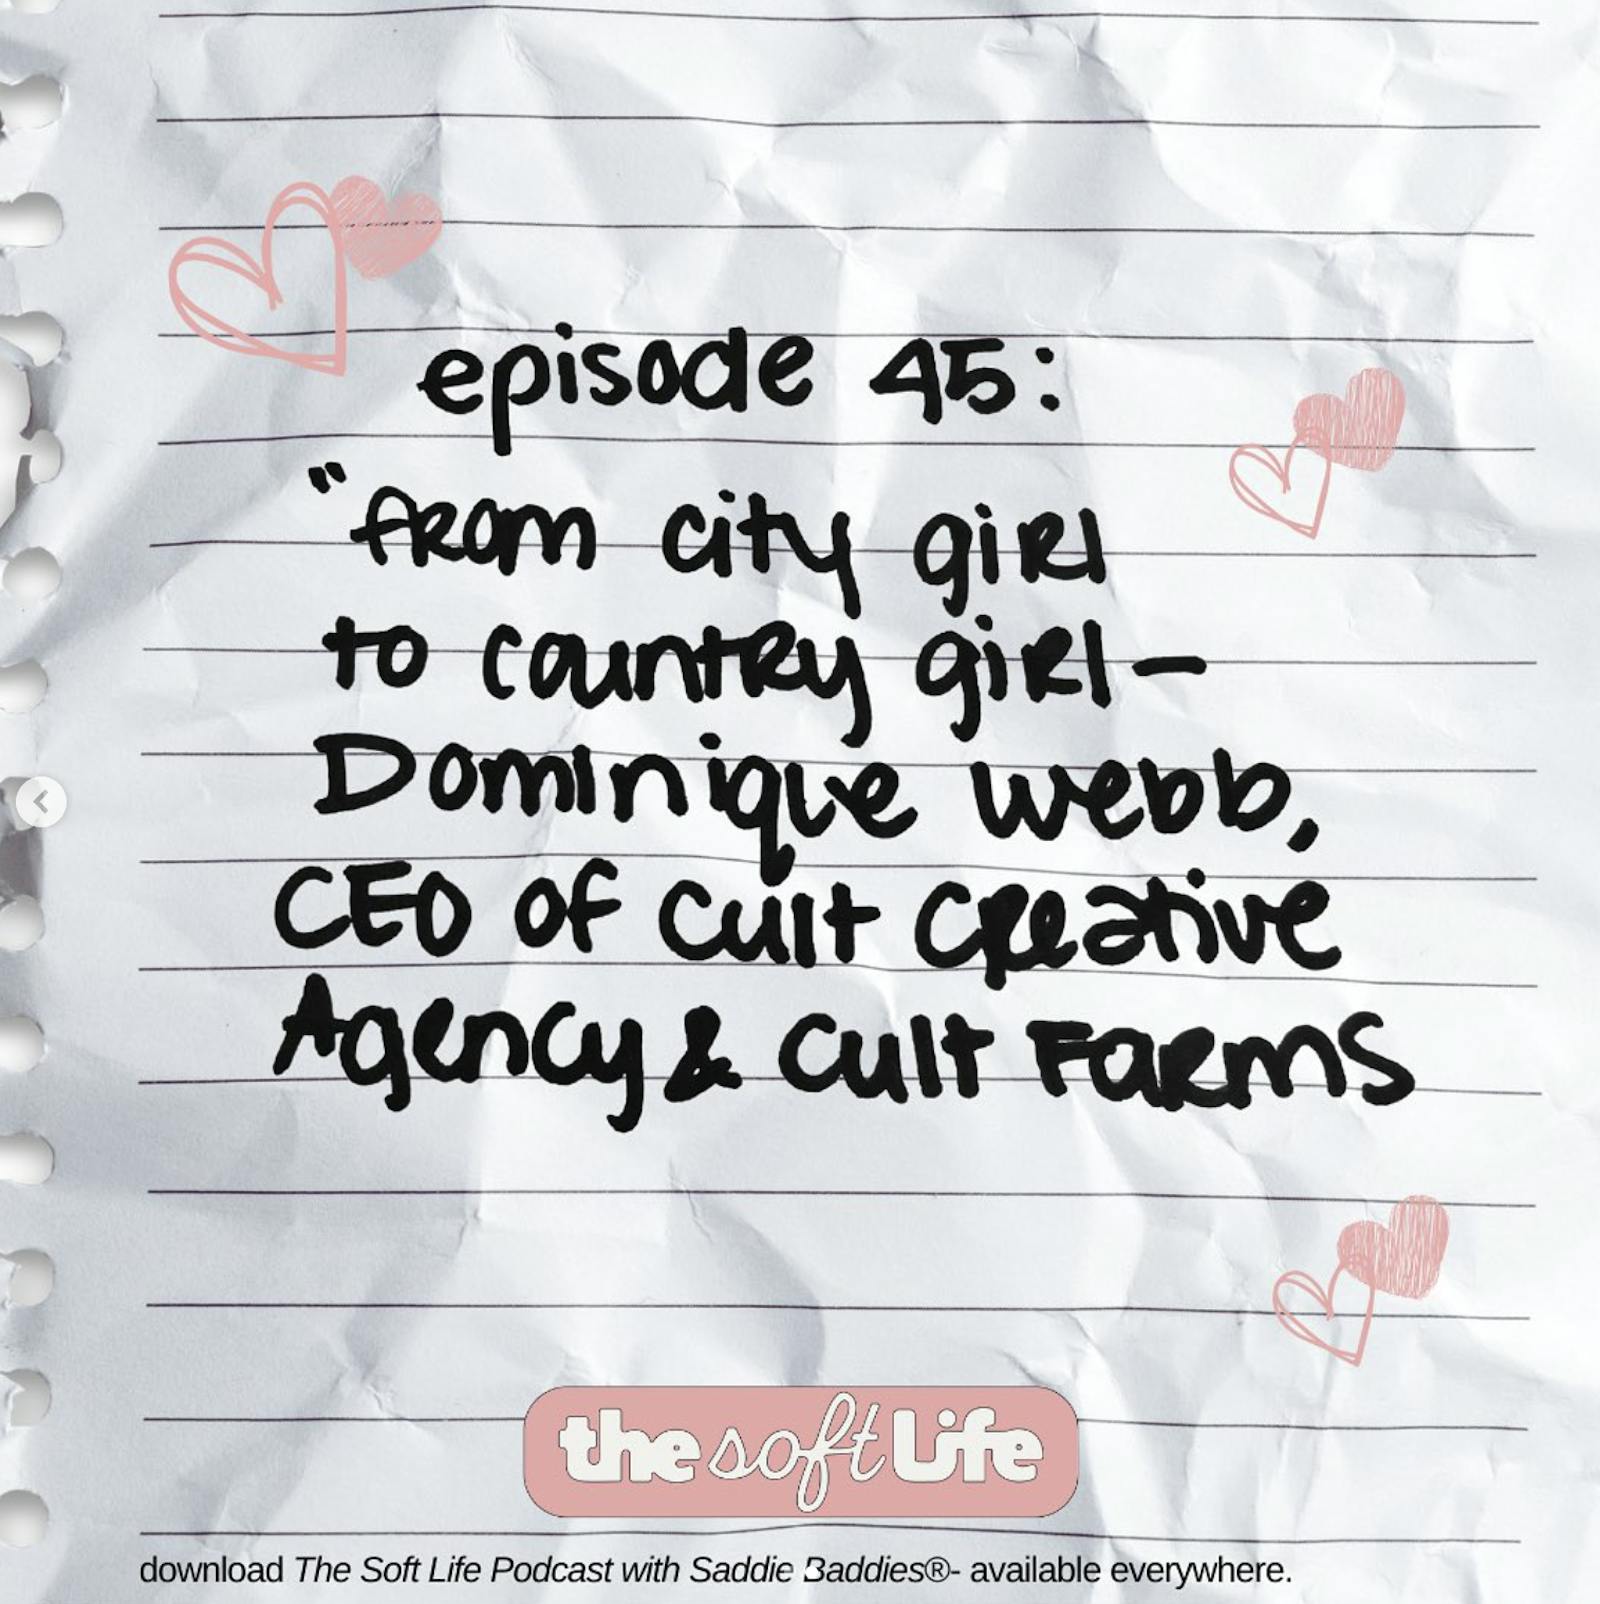 ‎The Soft Life with Saddie Baddies: “From City Girl to Country Girl” Dominique Webb: CEO of Cult Creative Agency & Cult Farms on Apple Podcasts